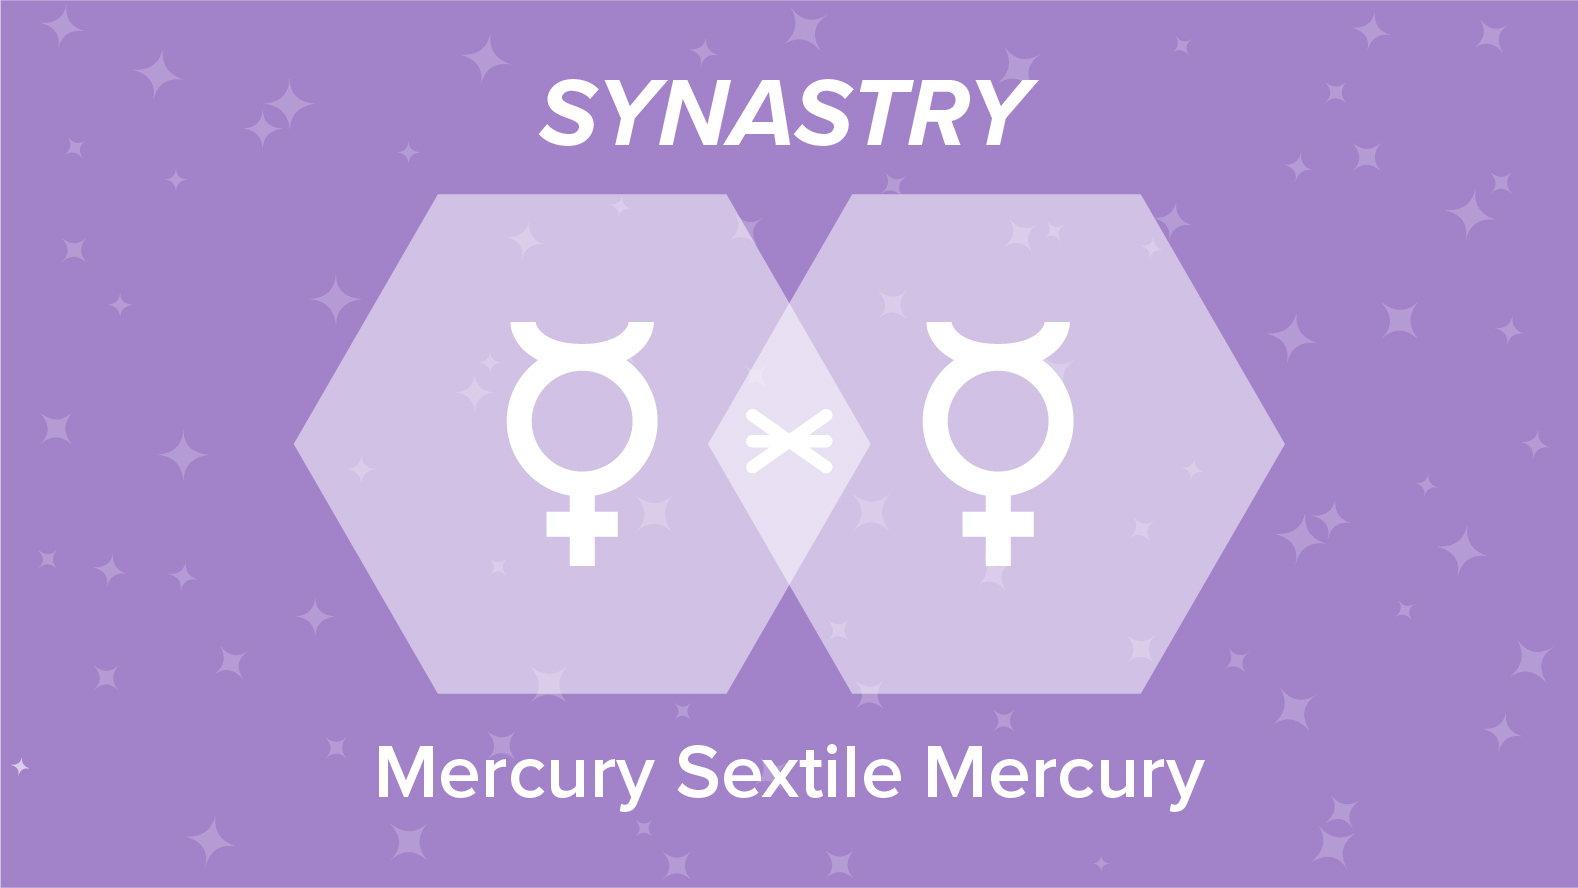 Mercury Sextile Mercury Synastry: Relationships and Friendships Explained